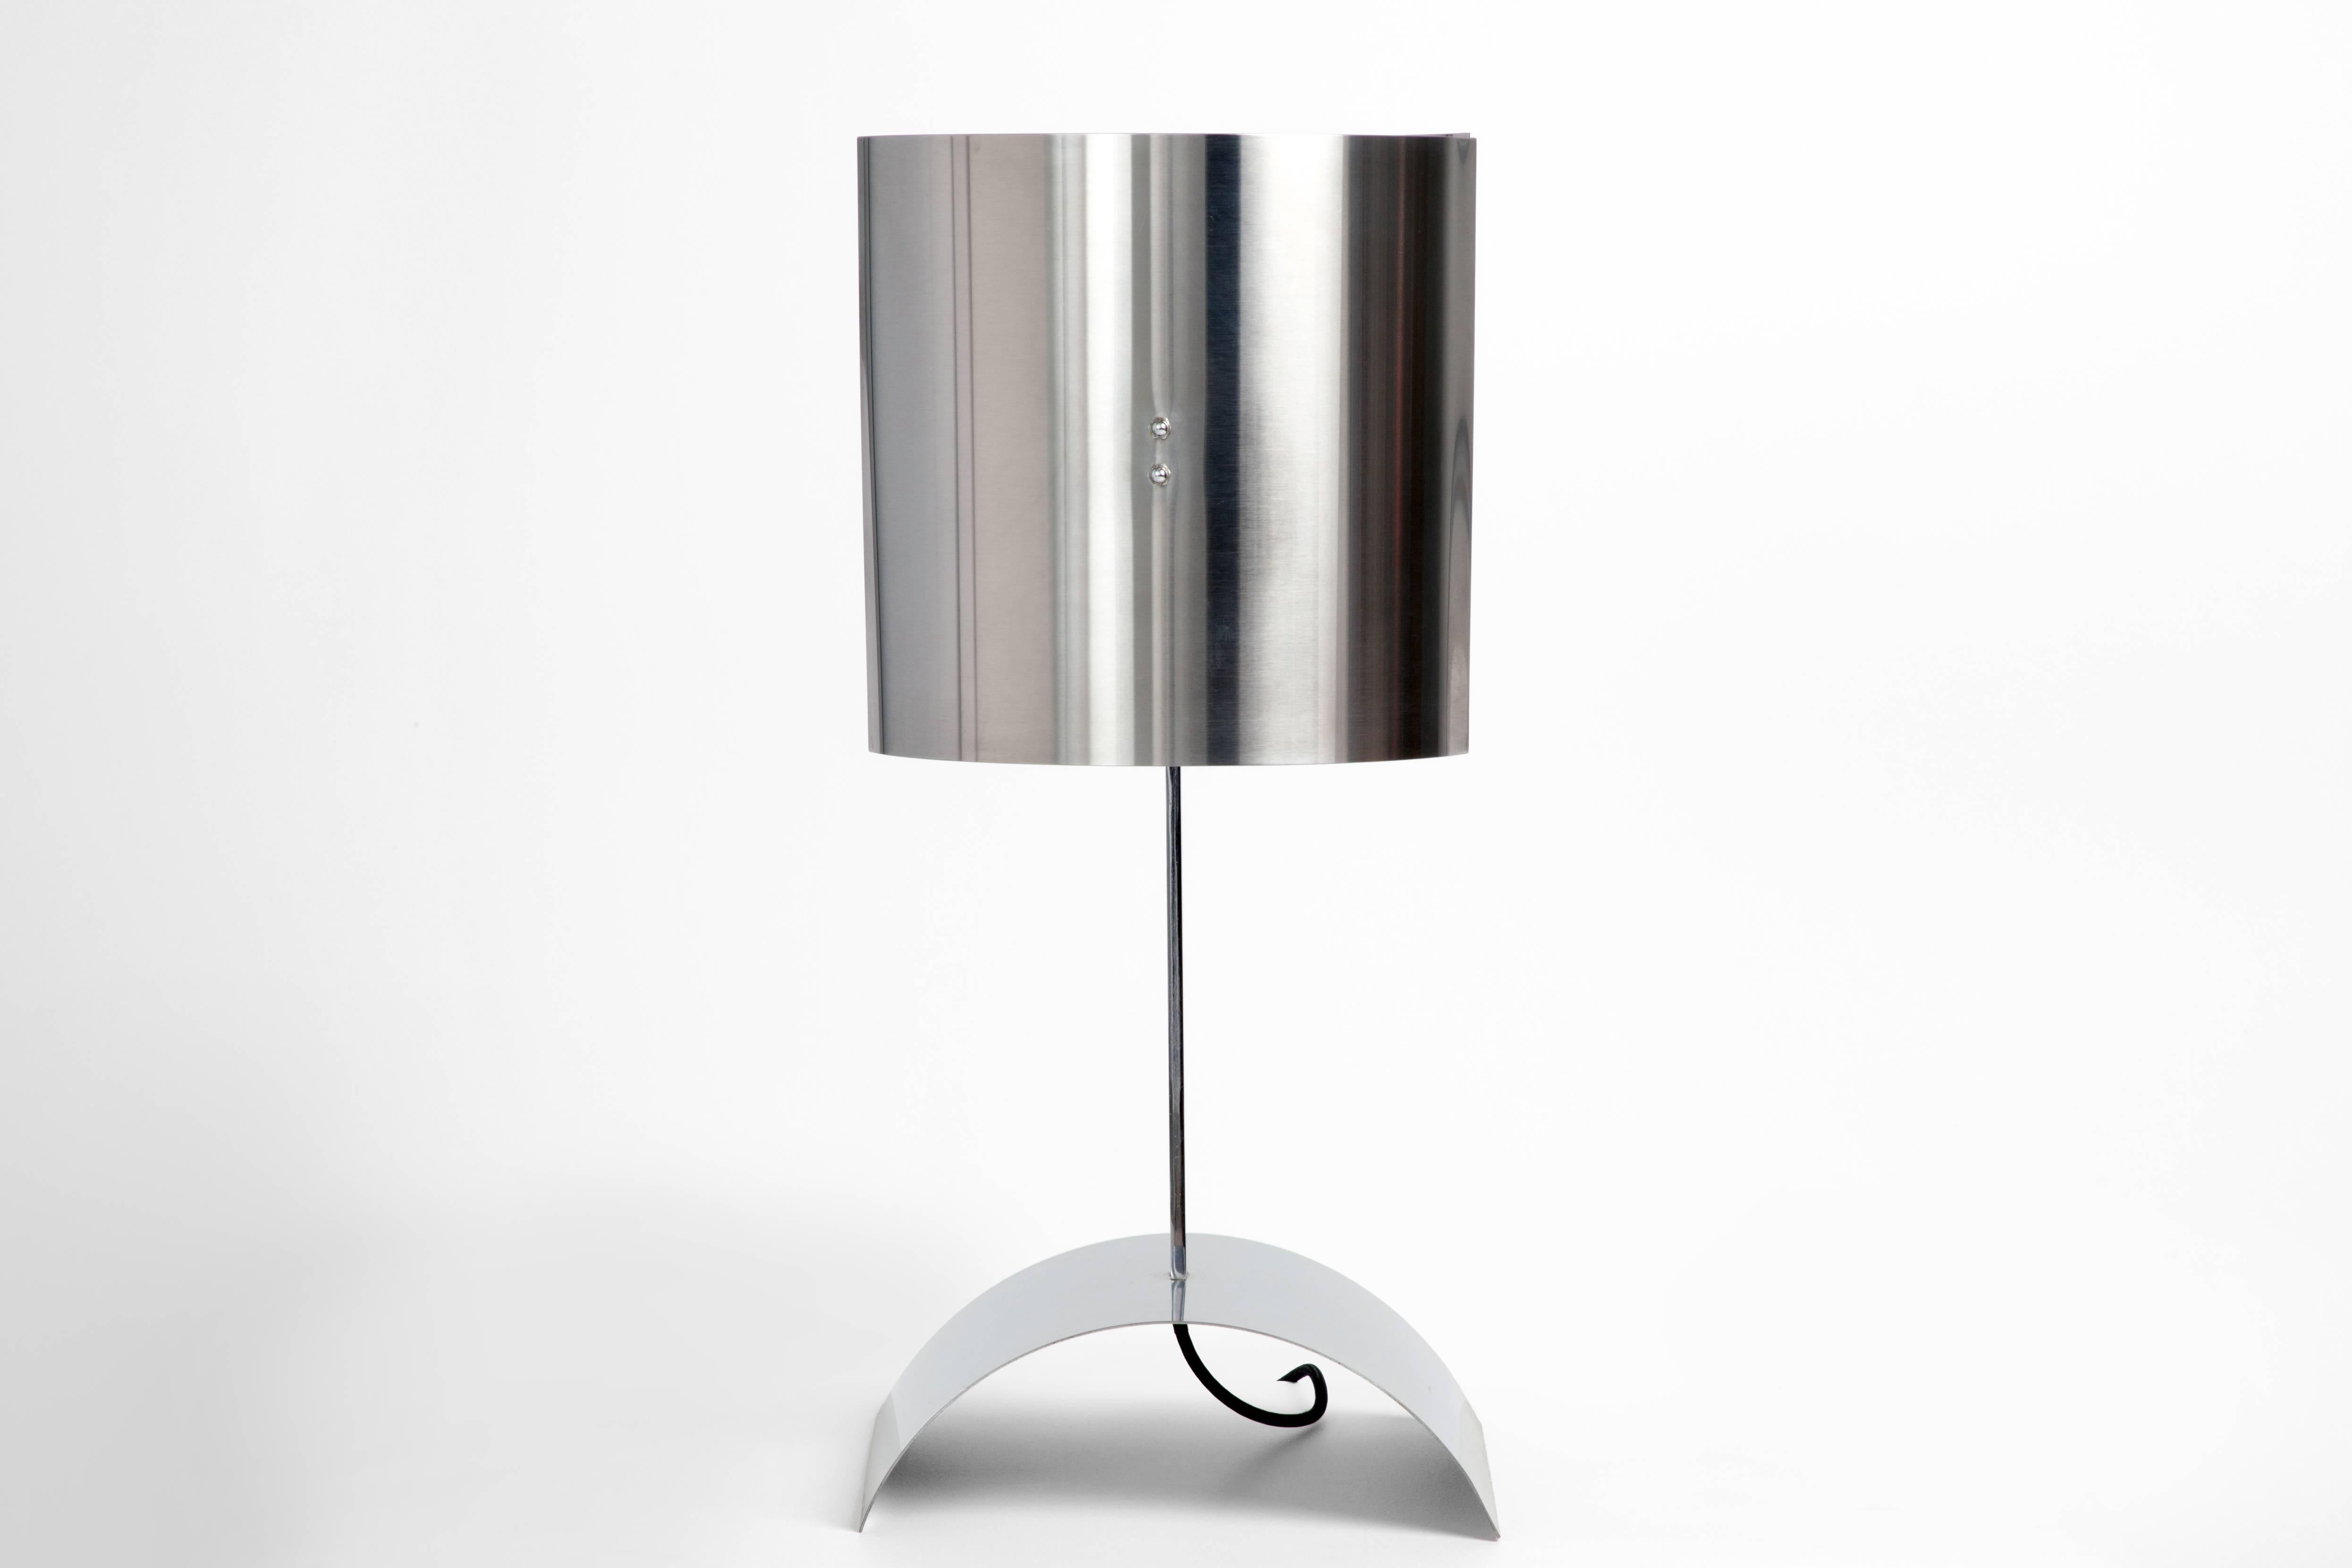 Stainless steel Modernist geometric table lamp by Jean Pierre Bouvier.

Wired to US standards.